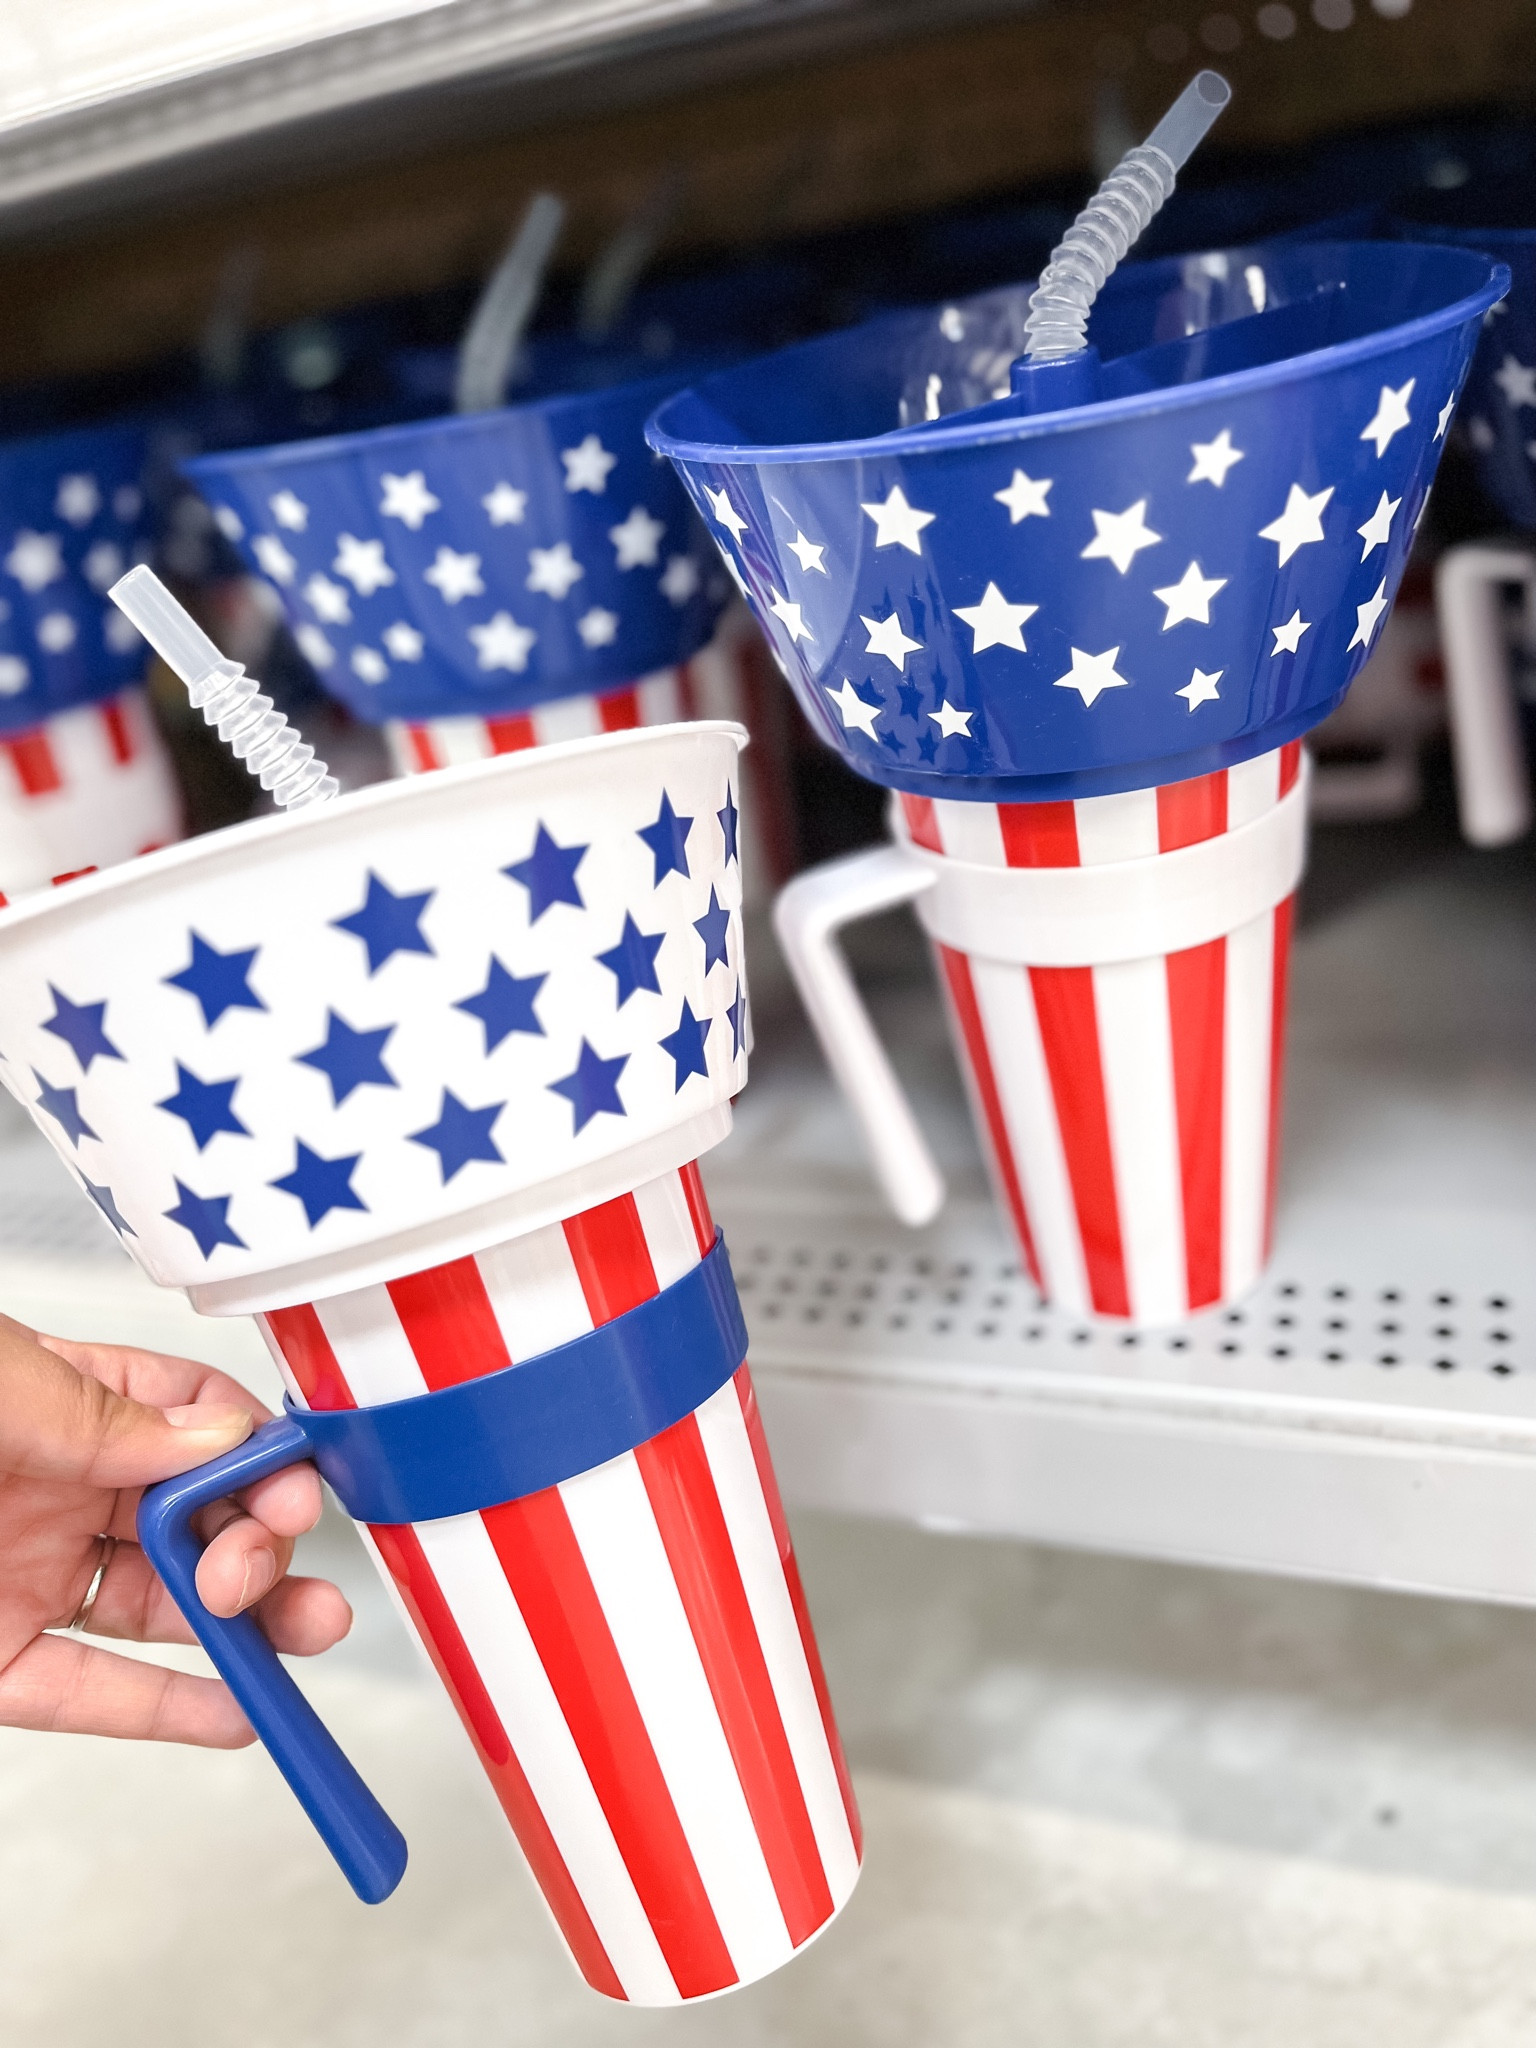 16oz Stainless Steel Party Cup - Patriotic Apparel